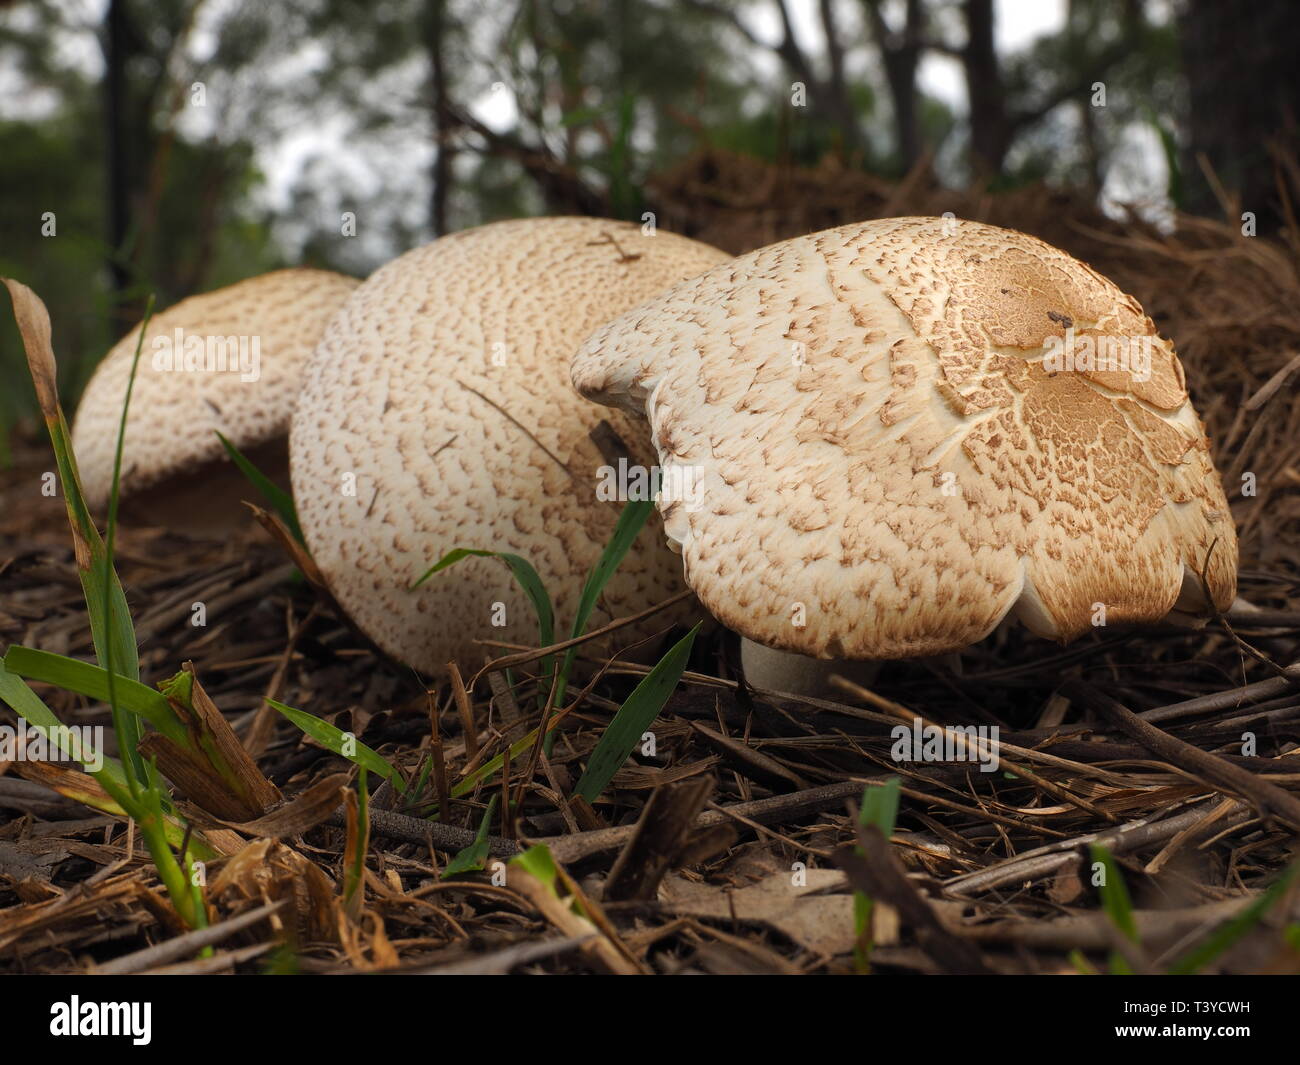 Mushrooms. White capped, wild mushrooms growing under a tree in a field. Stock Photo